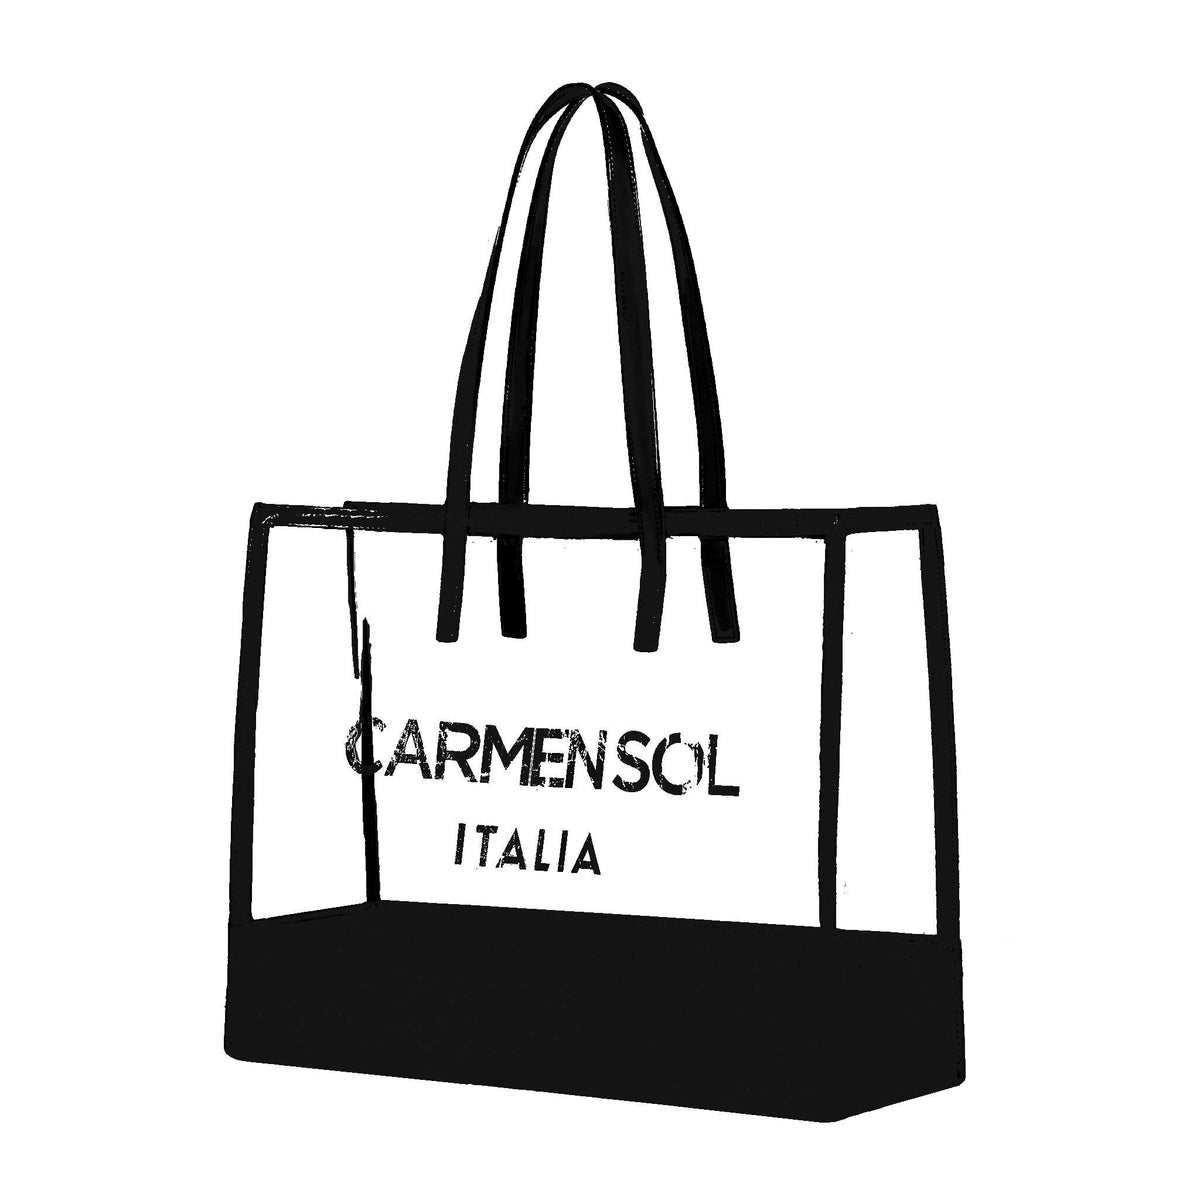 Recyclable Carmen Sol Taormina large tote bags in color black